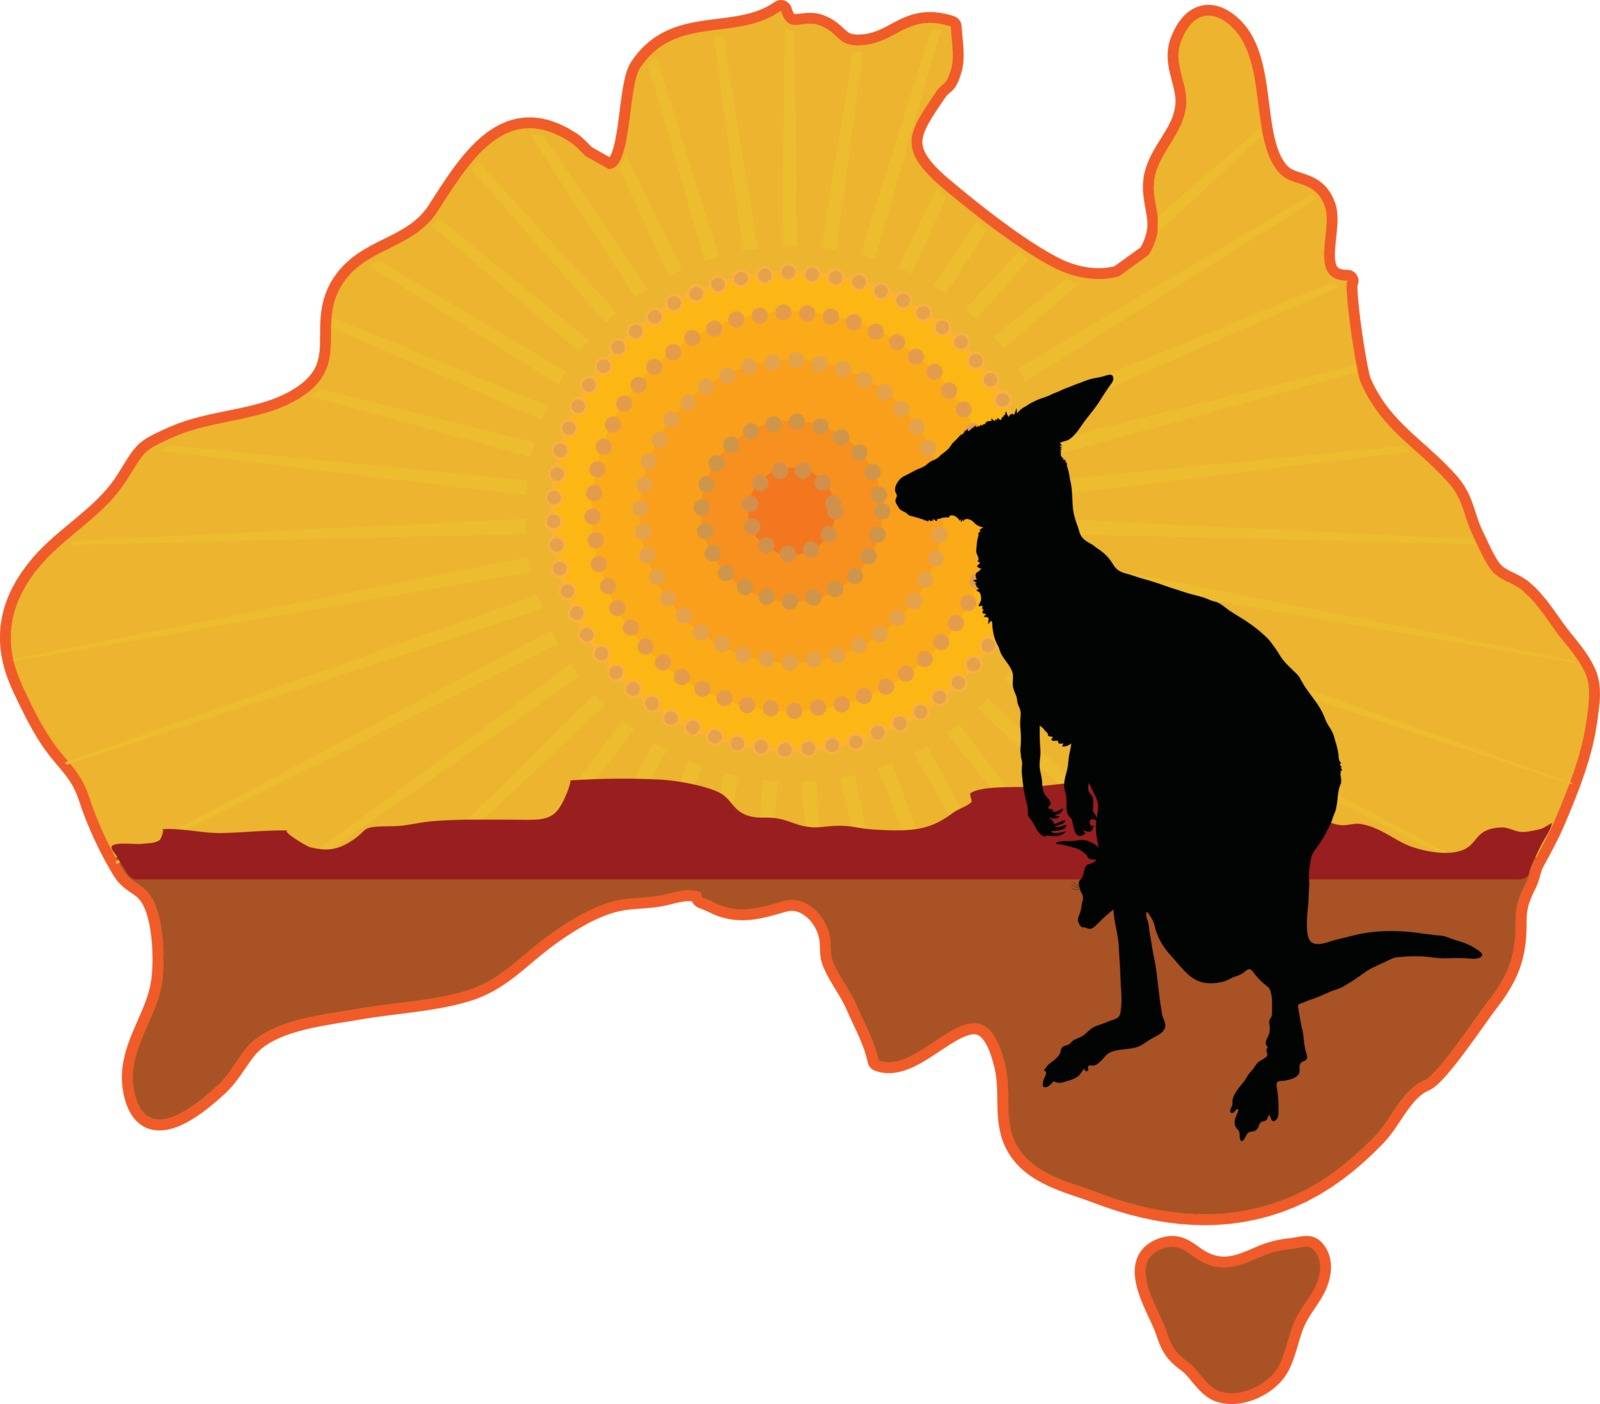 A stylized map of Australia with a silhouette of a kangaroo with a joey in its pouch